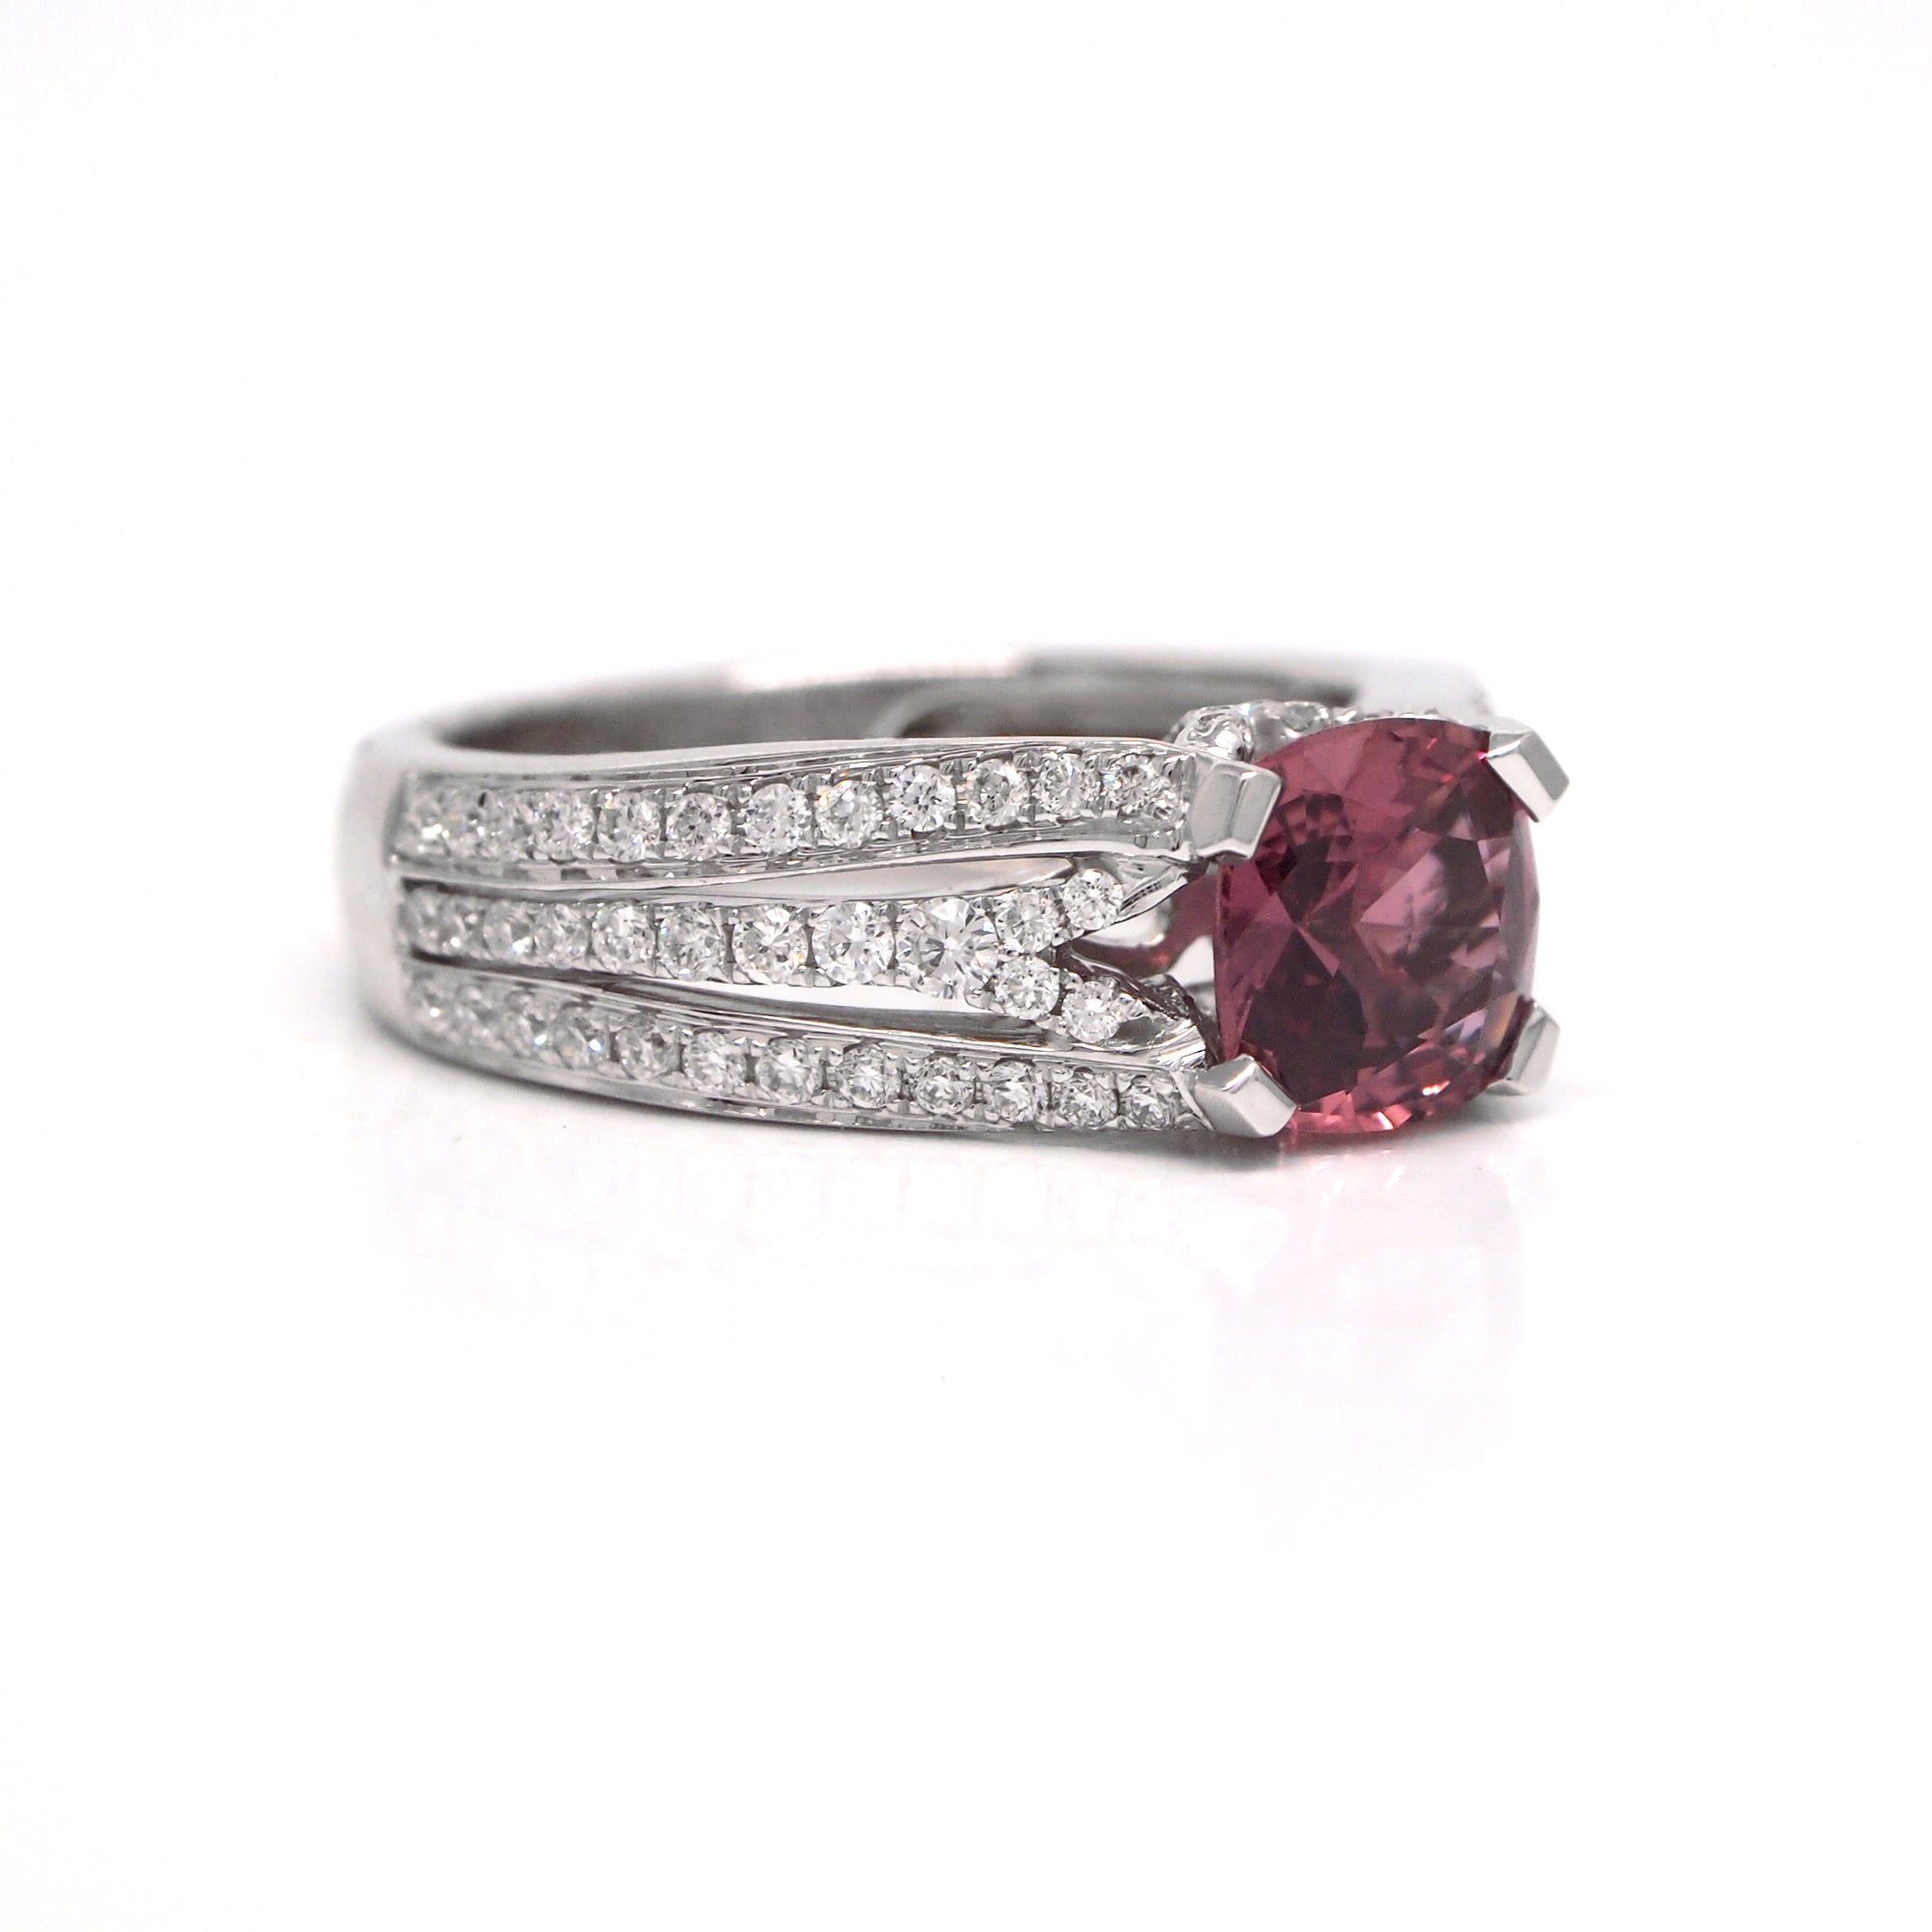 14K White Gold Pink Sapphire And Diamond Ring